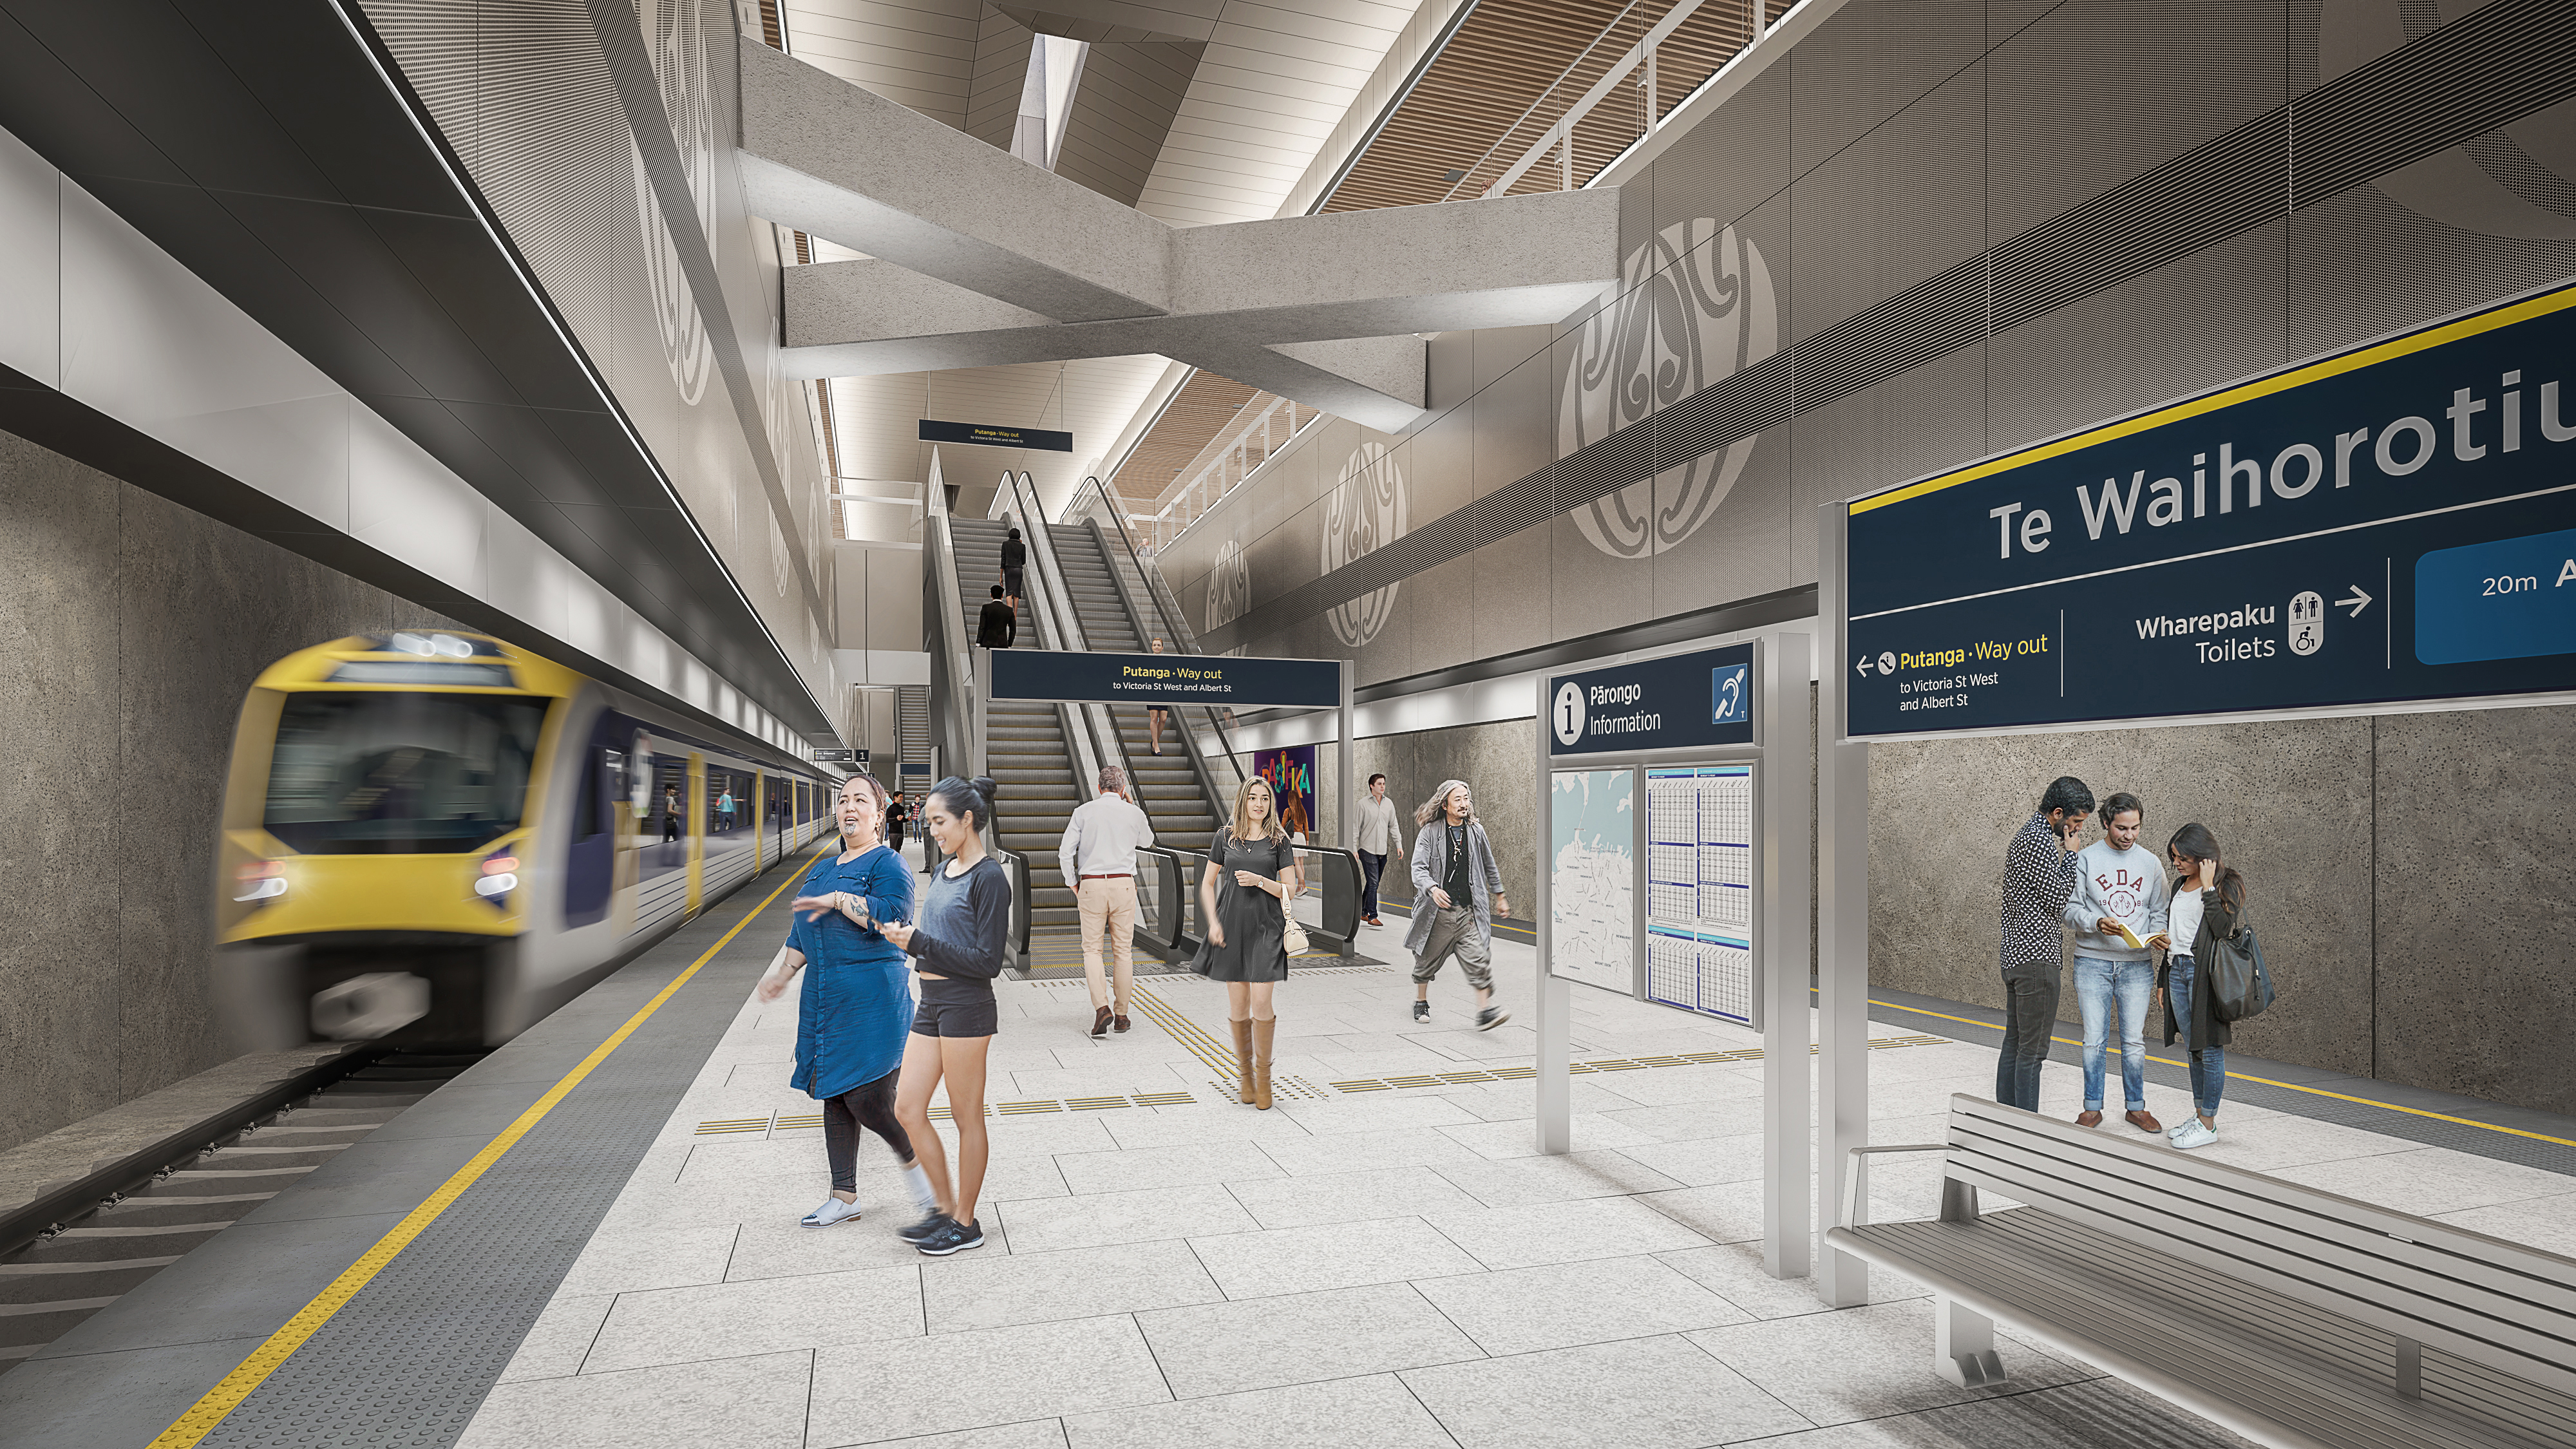 New images reveal re-designed Auckland City Rail Link stations and